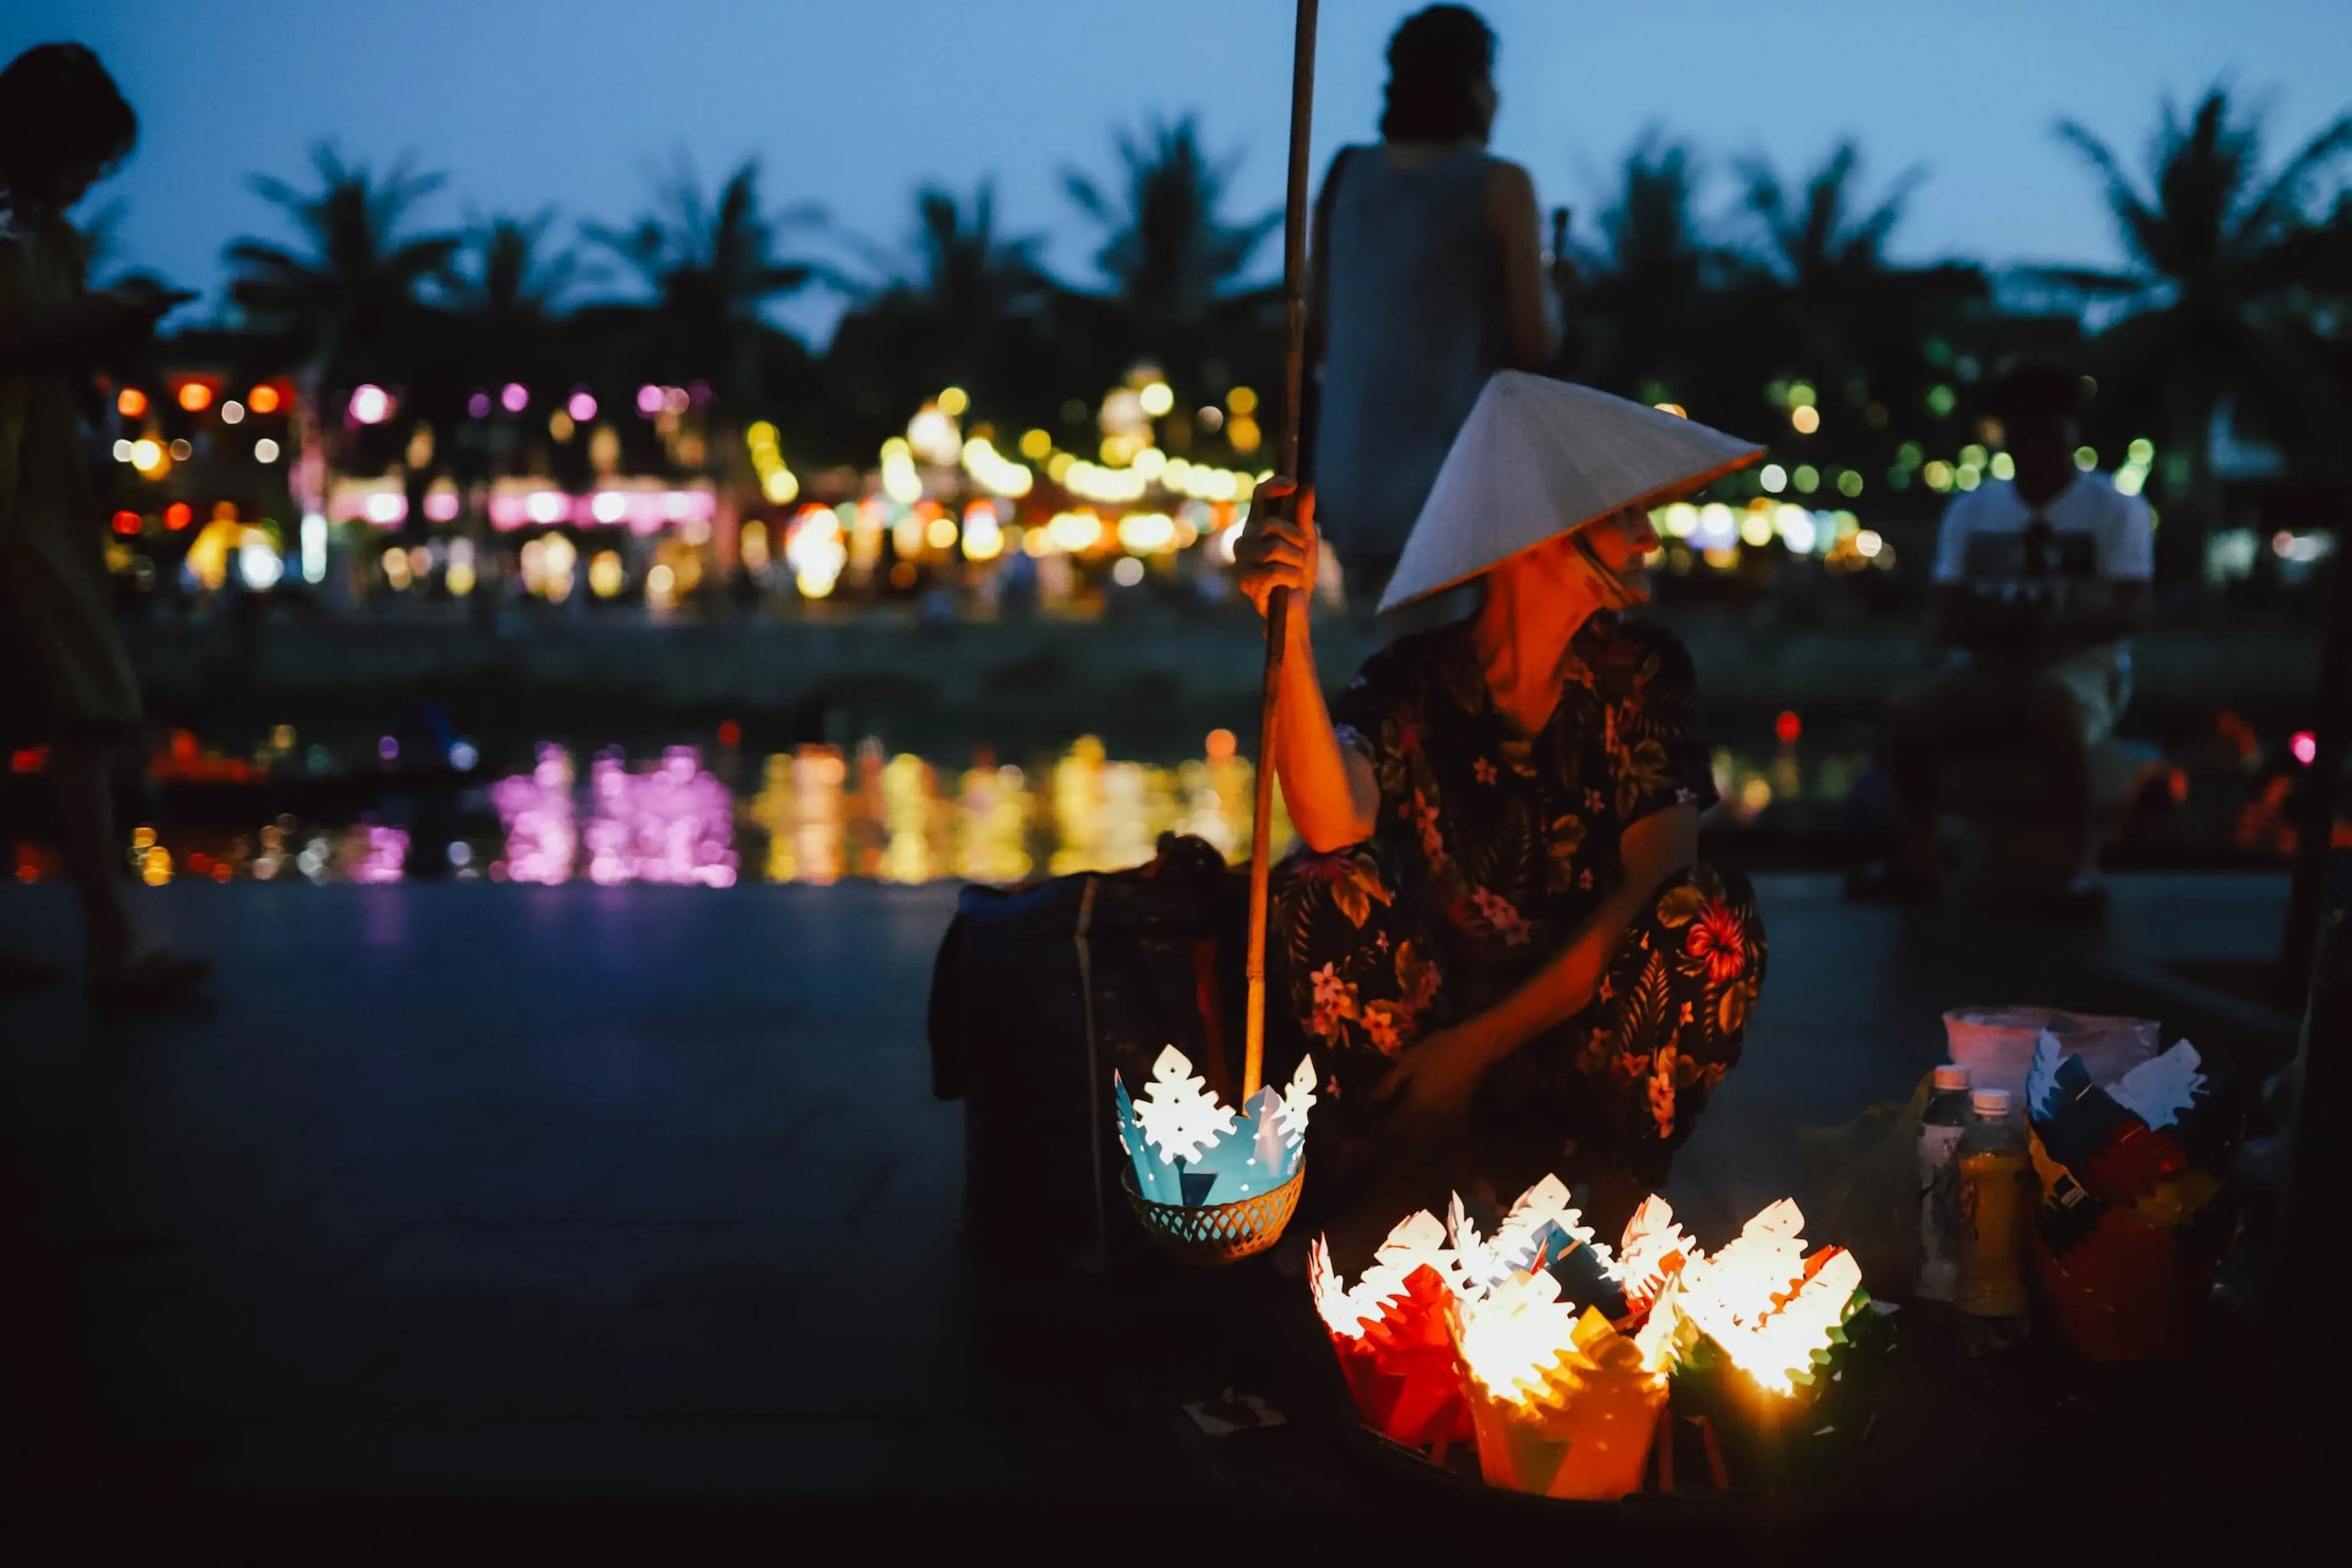 At night, all streets in Hoi An got lit up by lanterns